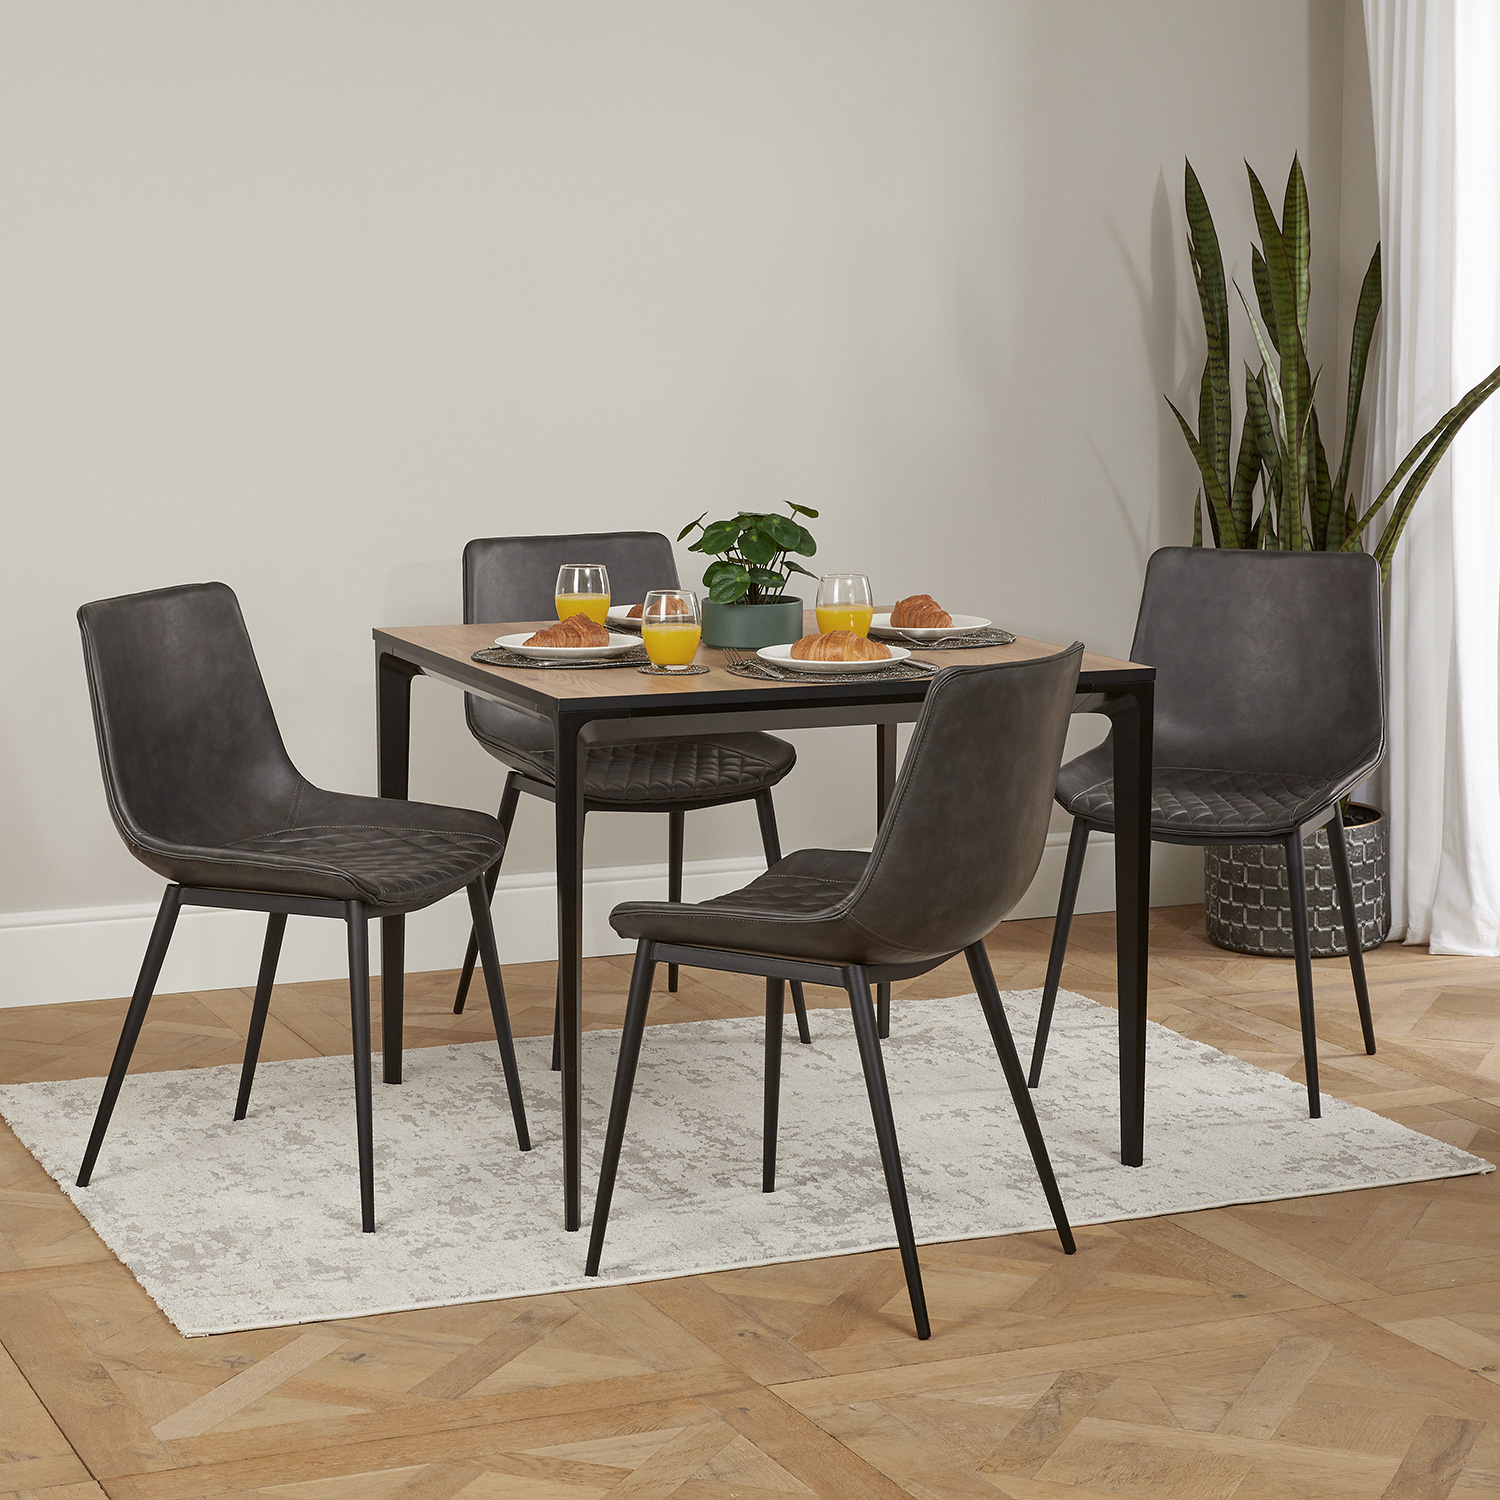 Bellagio 90cm Square Natural Oak Melamine Dining Table with 4x Leo Grey Dining Chairs